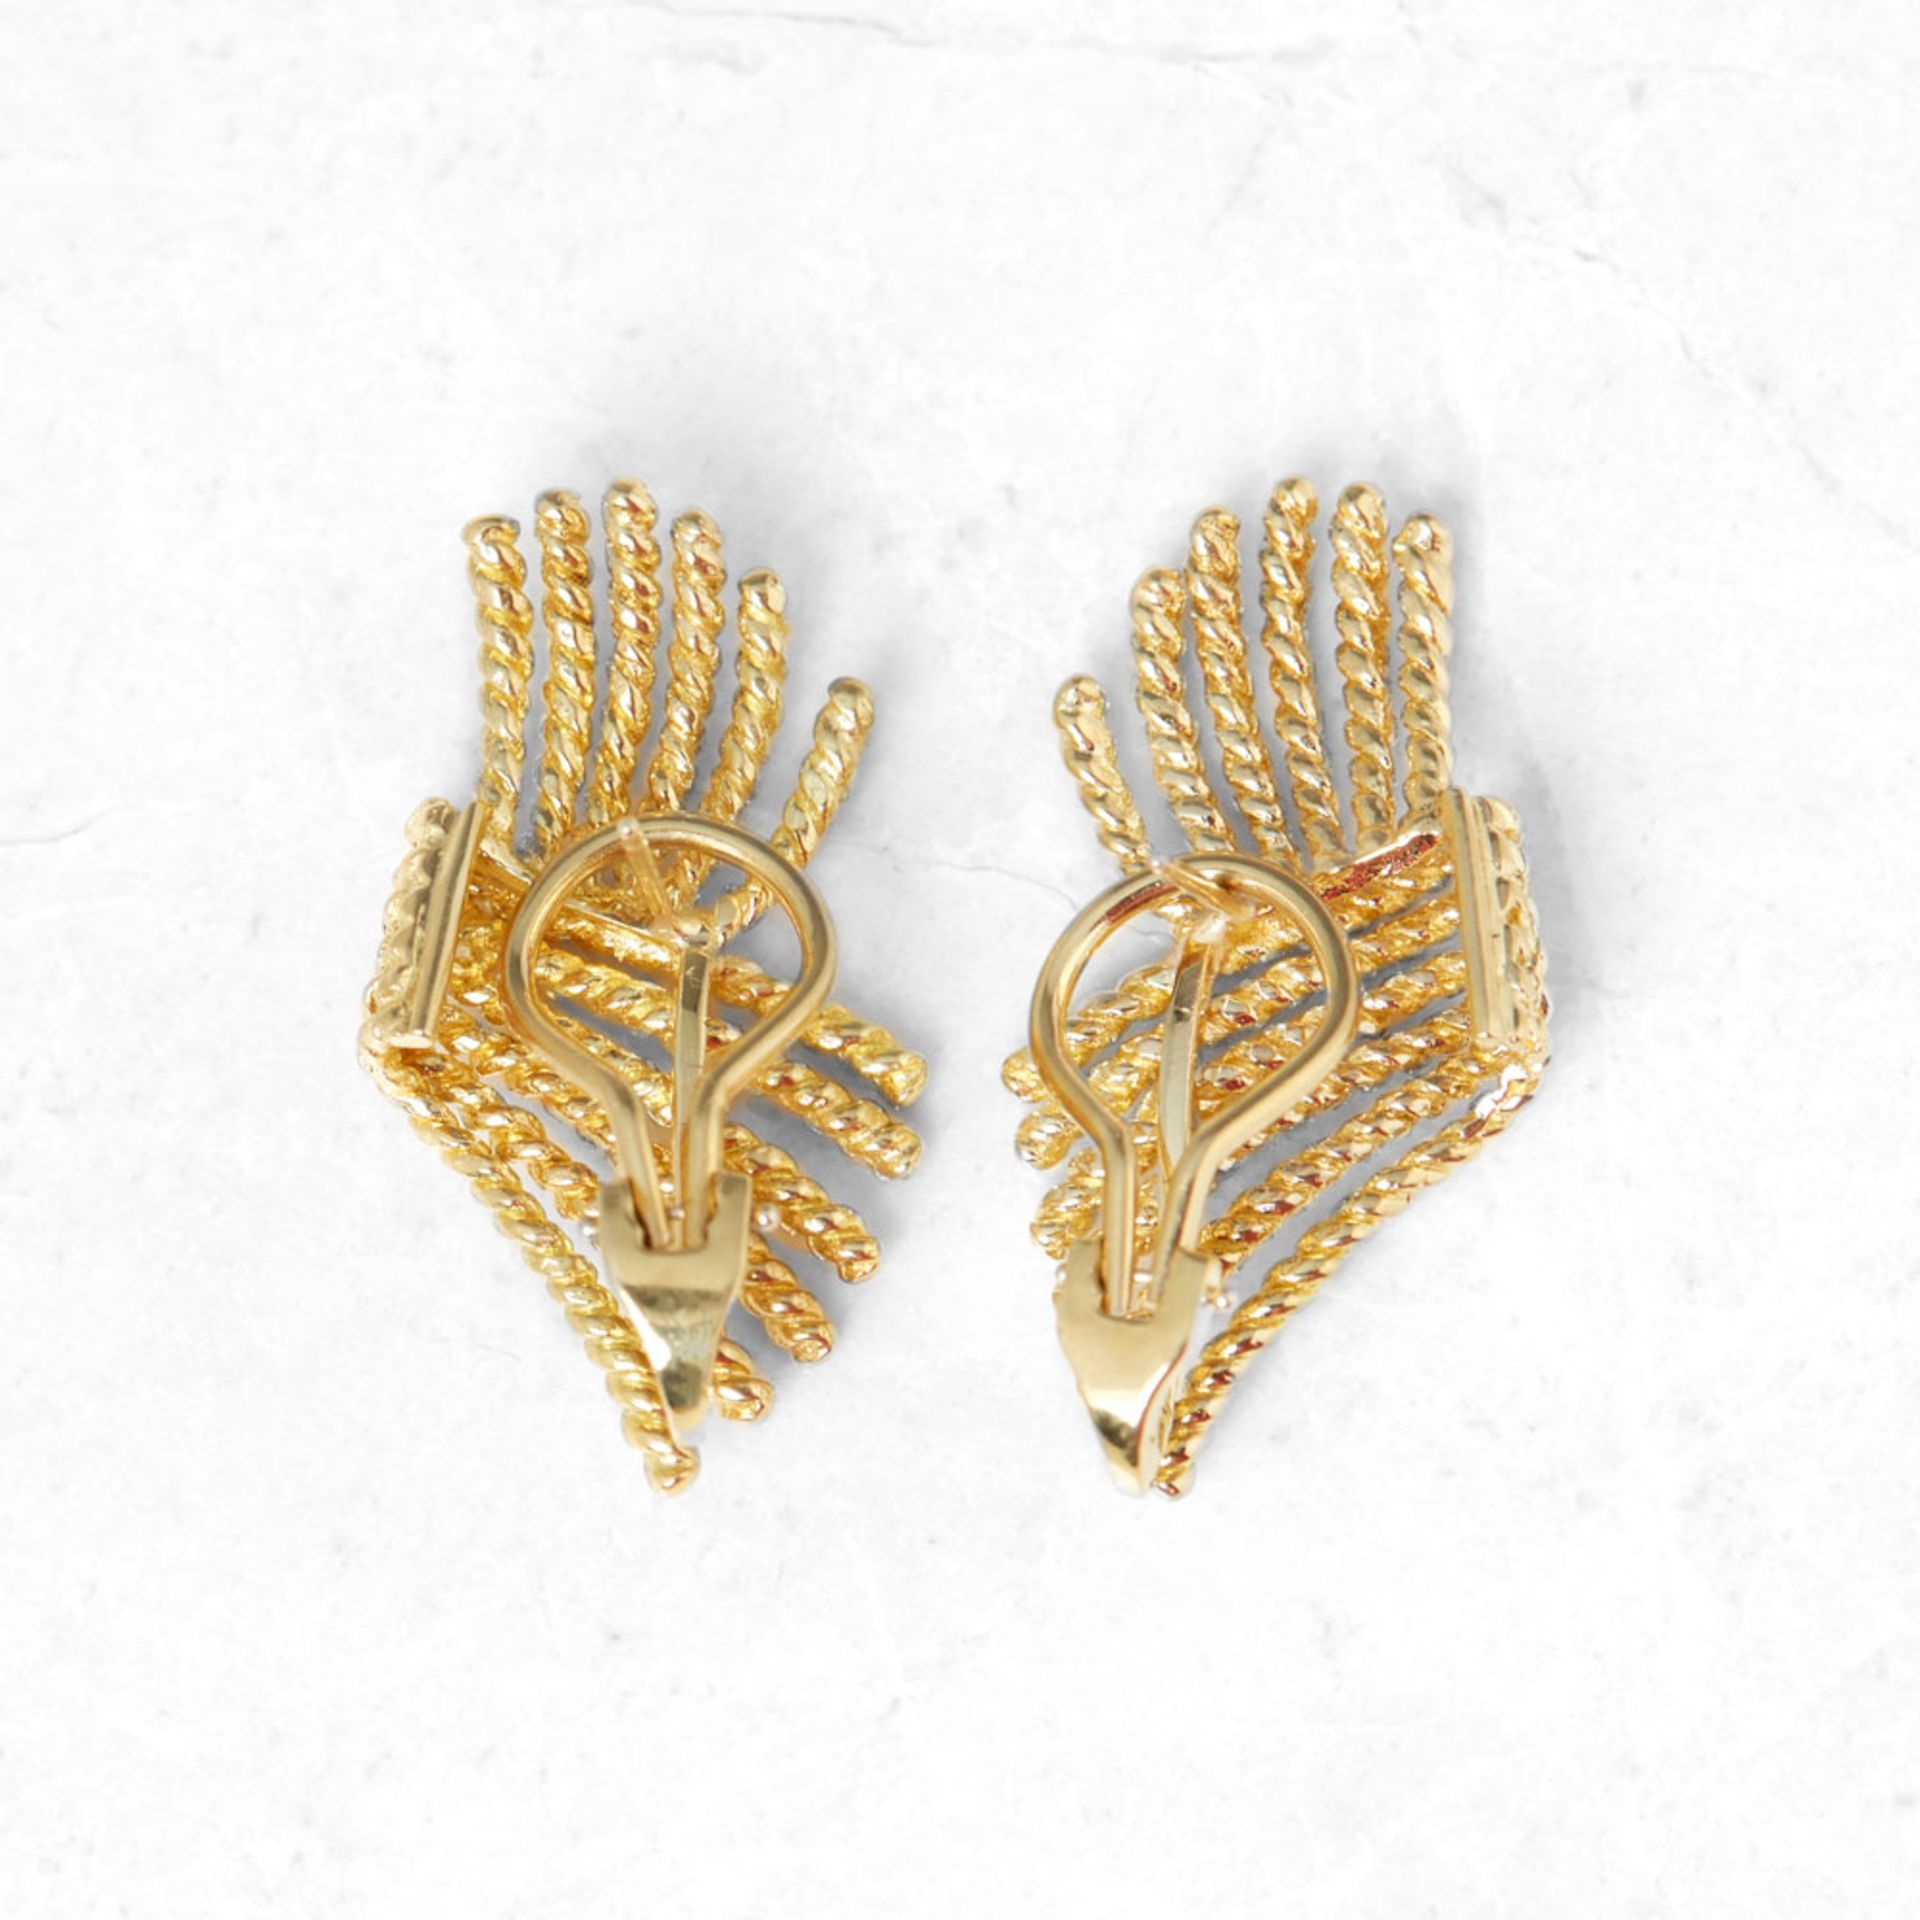 Tiffany & Co., 18k Yellow Gold Rope Design Schlumberger Earrings - Image 2 of 5